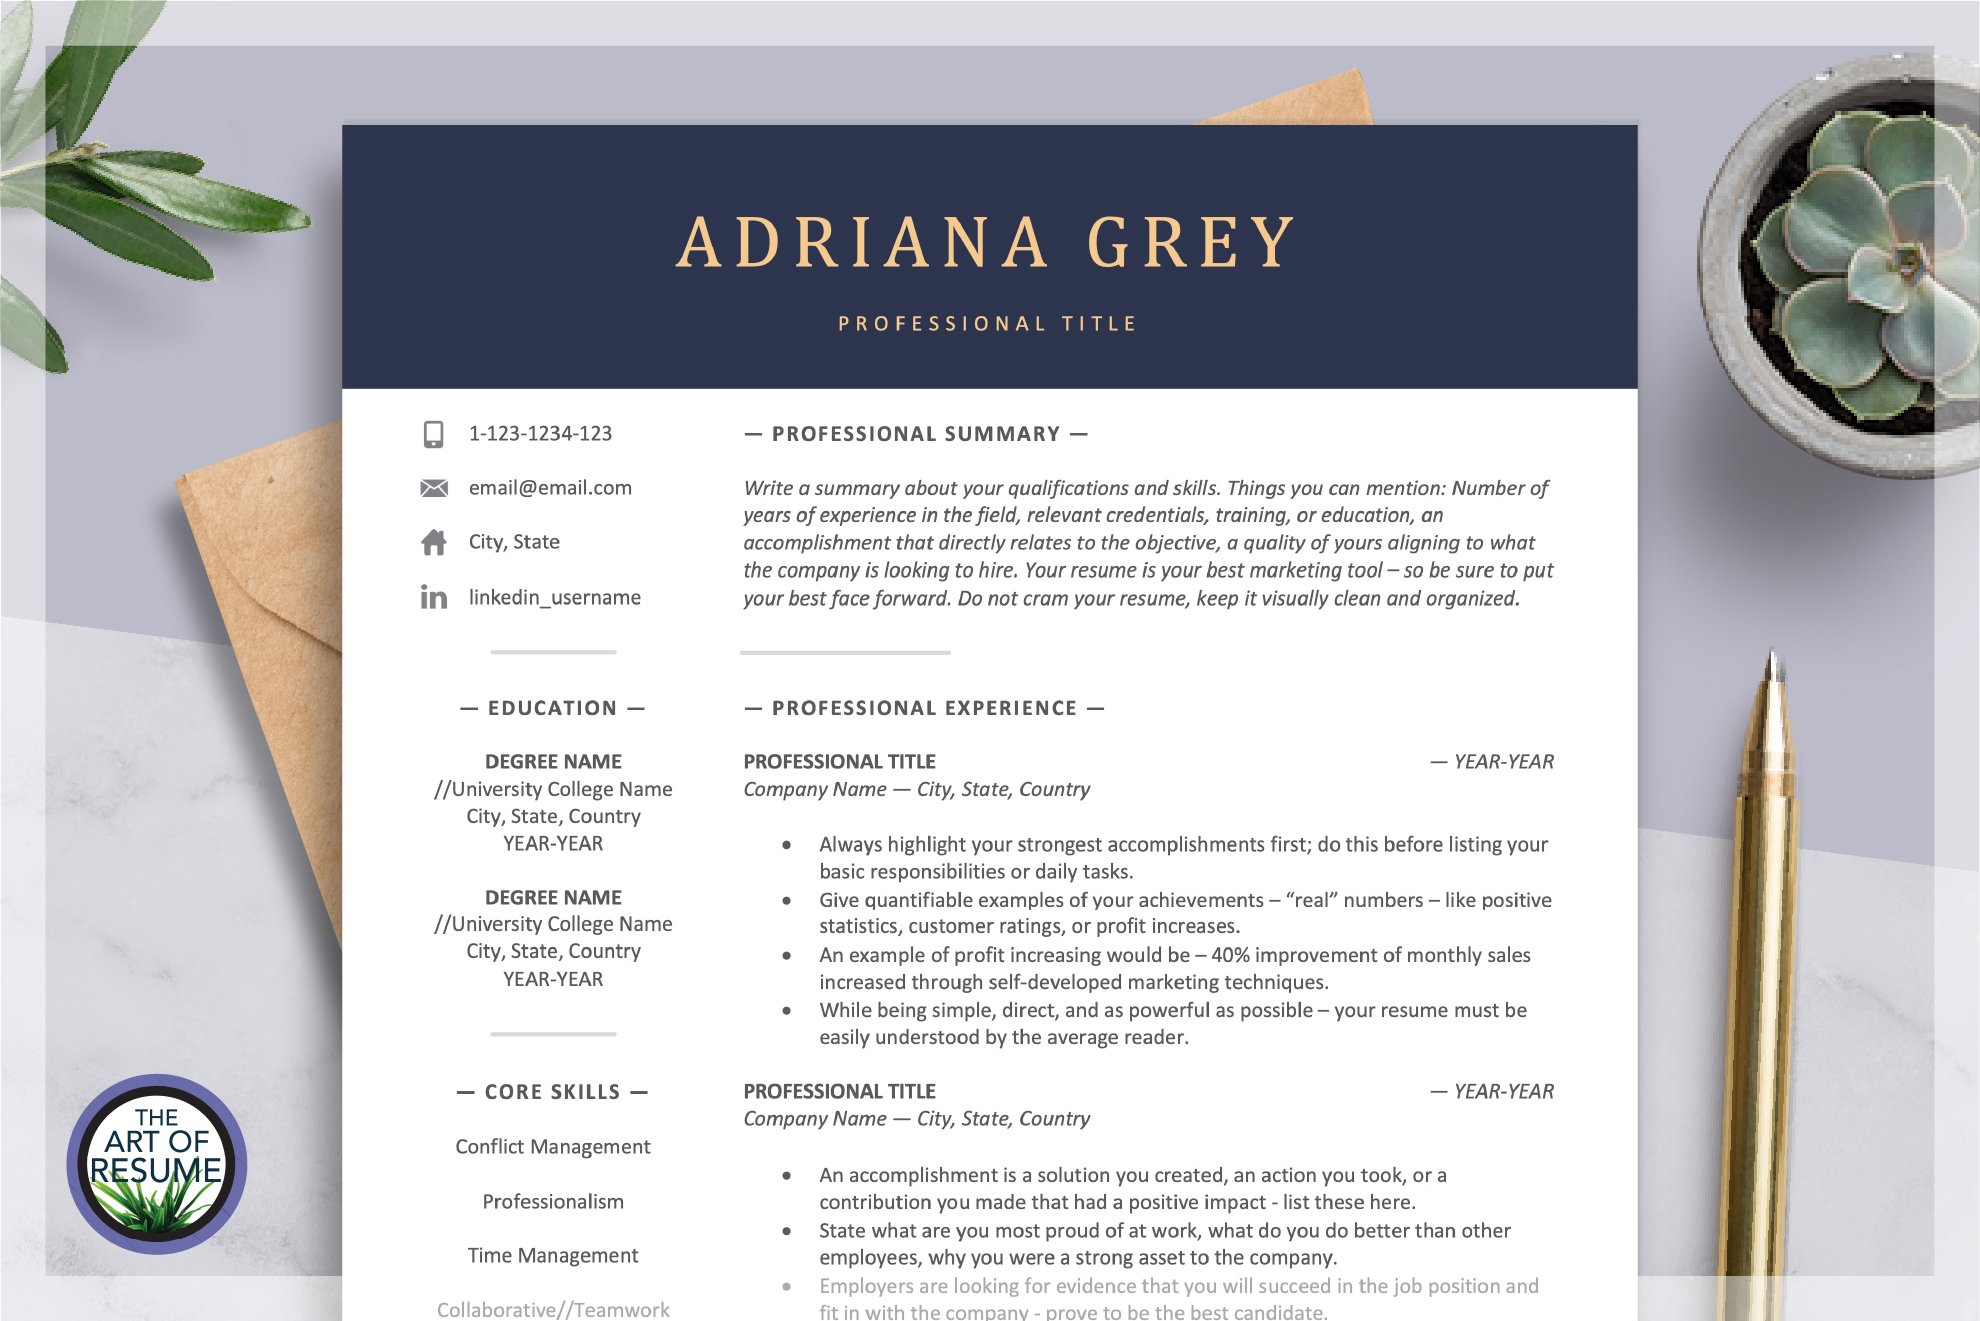 Professional Resume Template Design cover image.